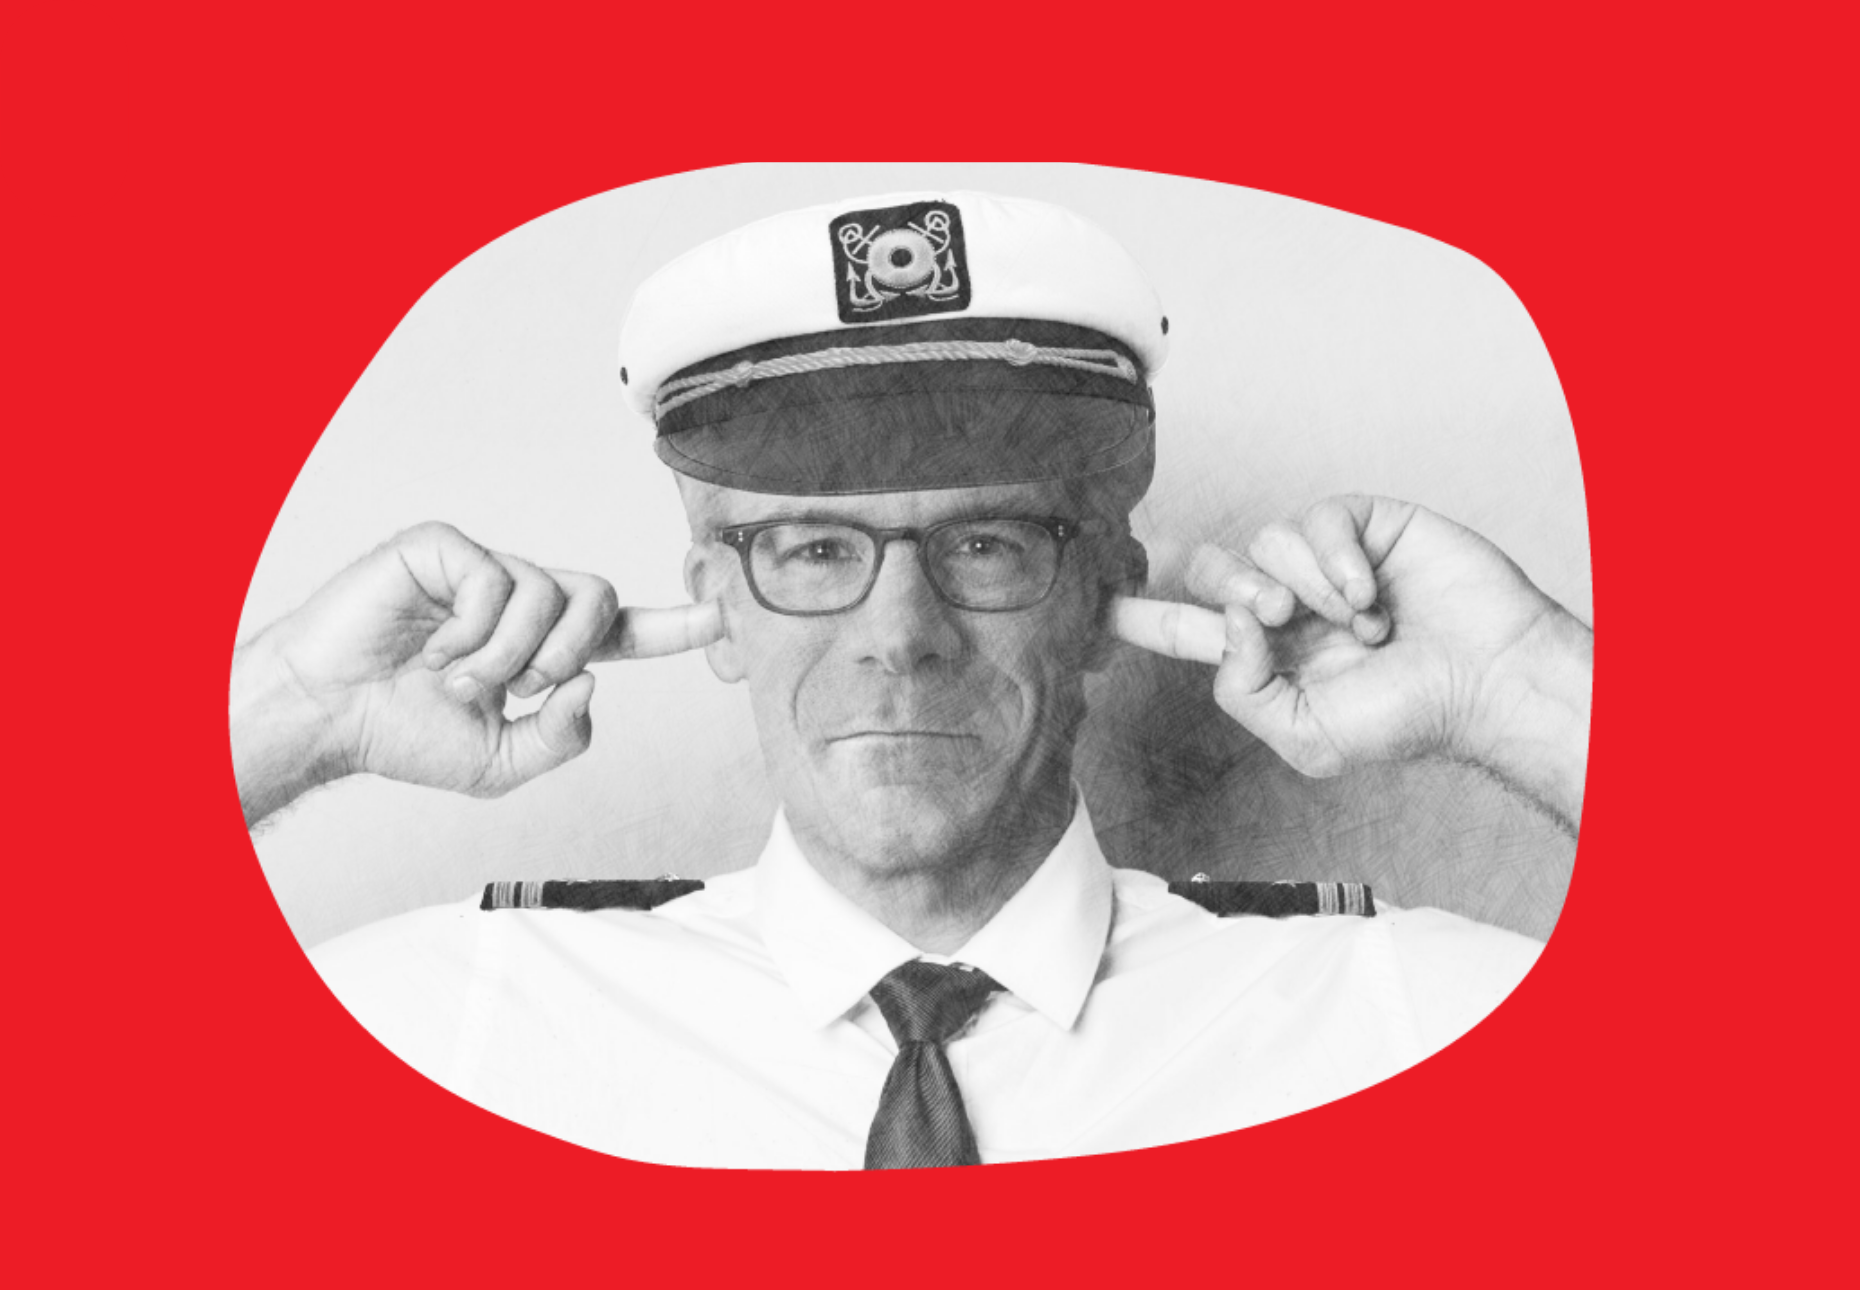 An illustrated black and white photo of Vanguard CEO Tim Buckley wearing a captain's hat with his fingers in his ears overlaid on a bright red background